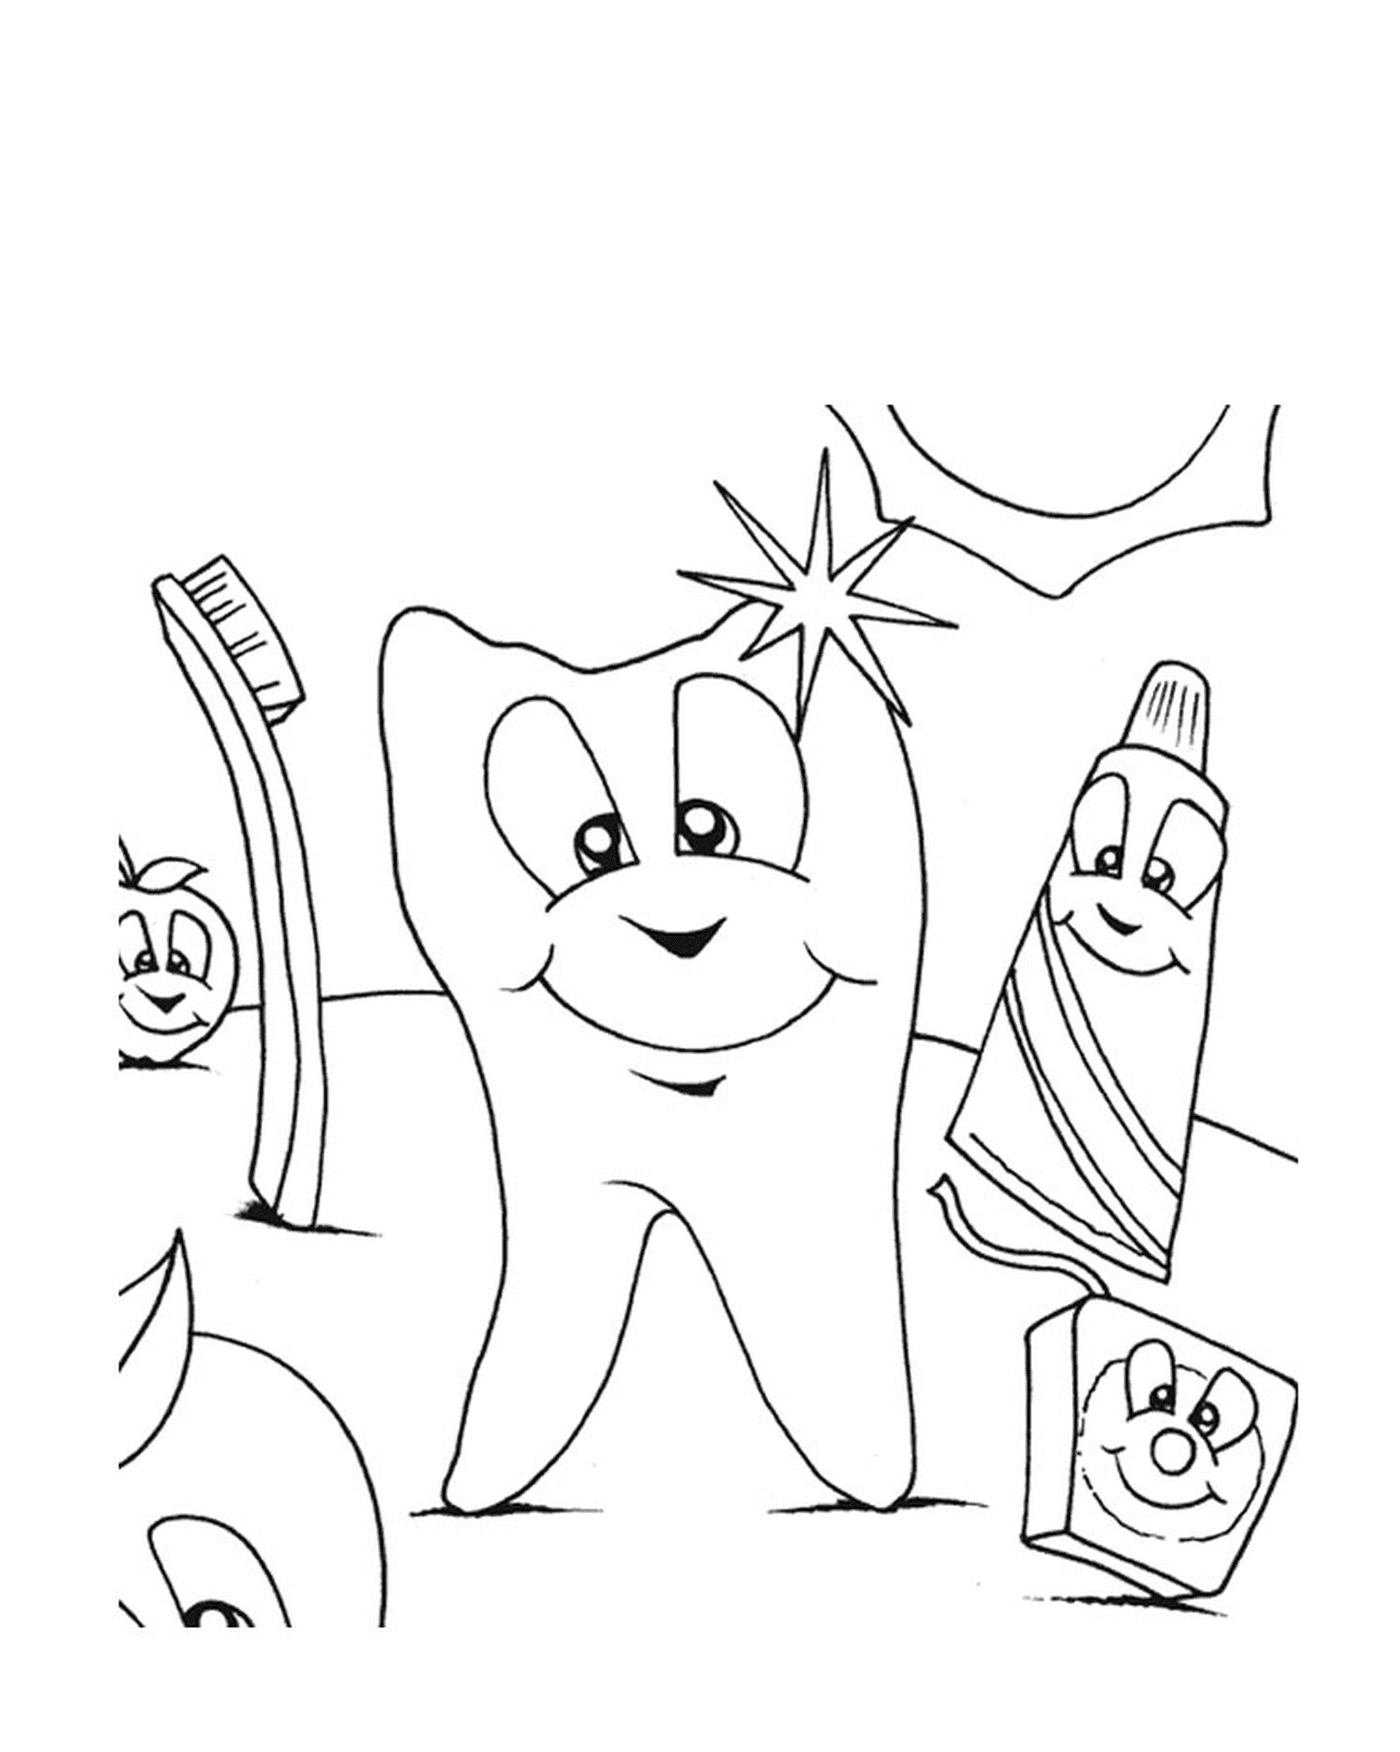  A clean tooth with toothbrush and toothpaste for children 